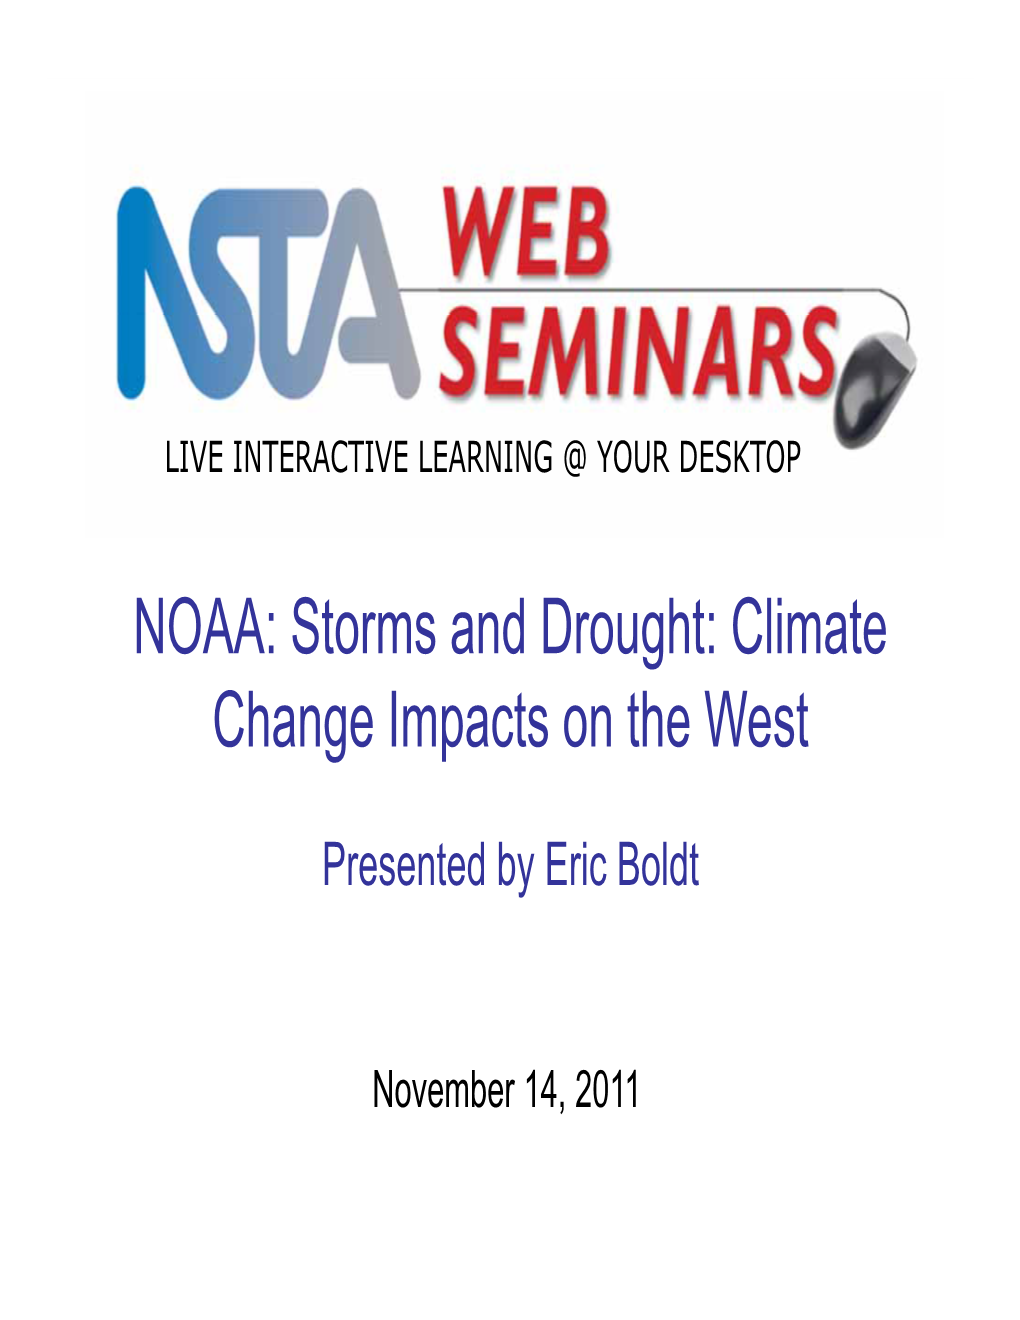 NOAA: Storms and Drought: Climate Change Impacts on the West